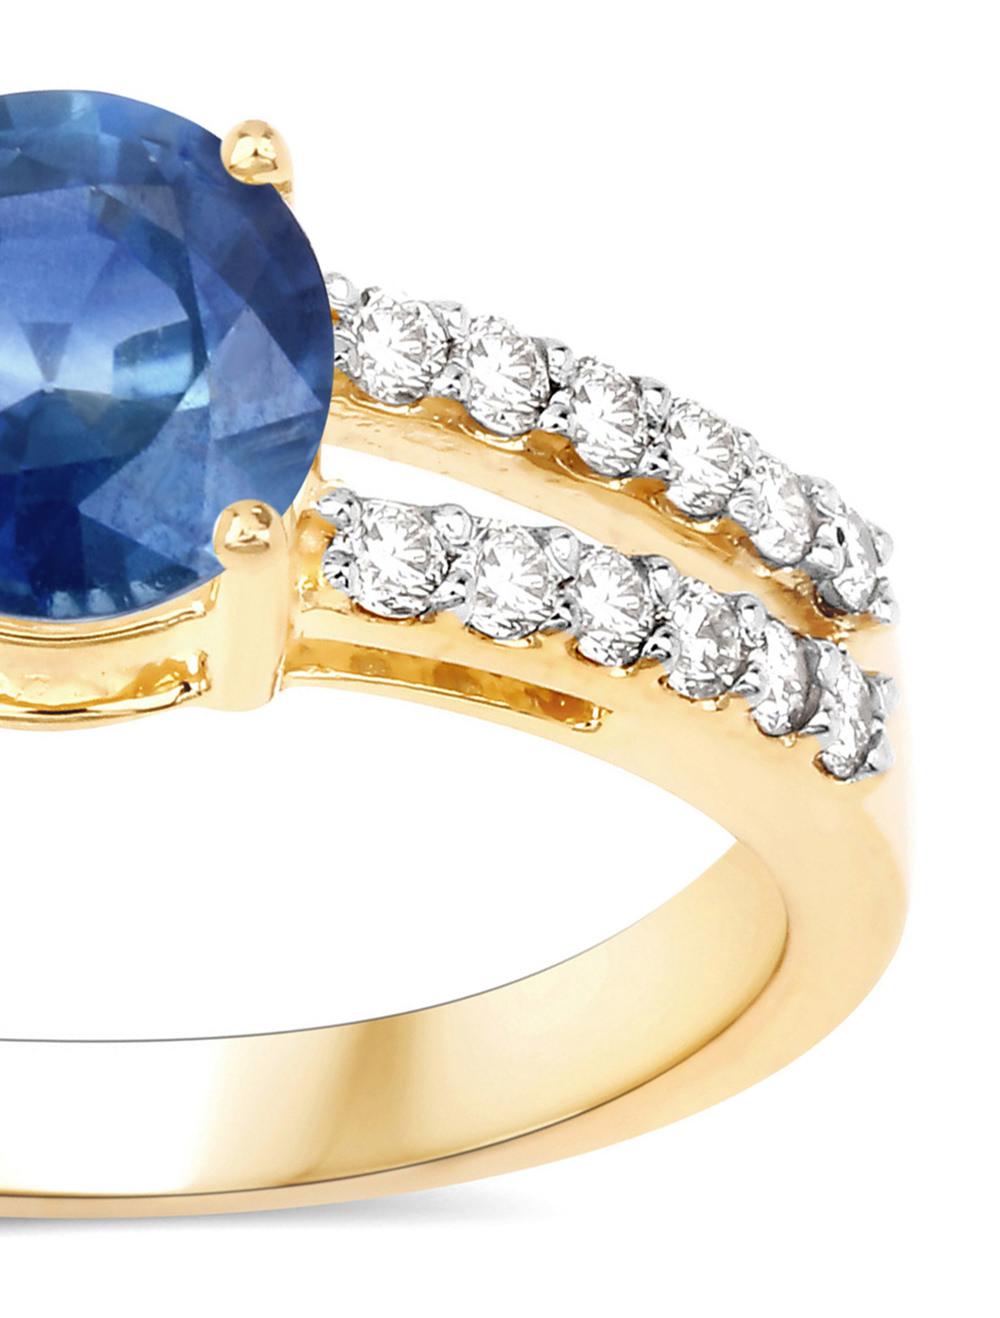 Natural 1 Carat Blue Sapphire and Diamond Ring Set In 14K Yellow Gold In New Condition For Sale In Laguna Niguel, CA